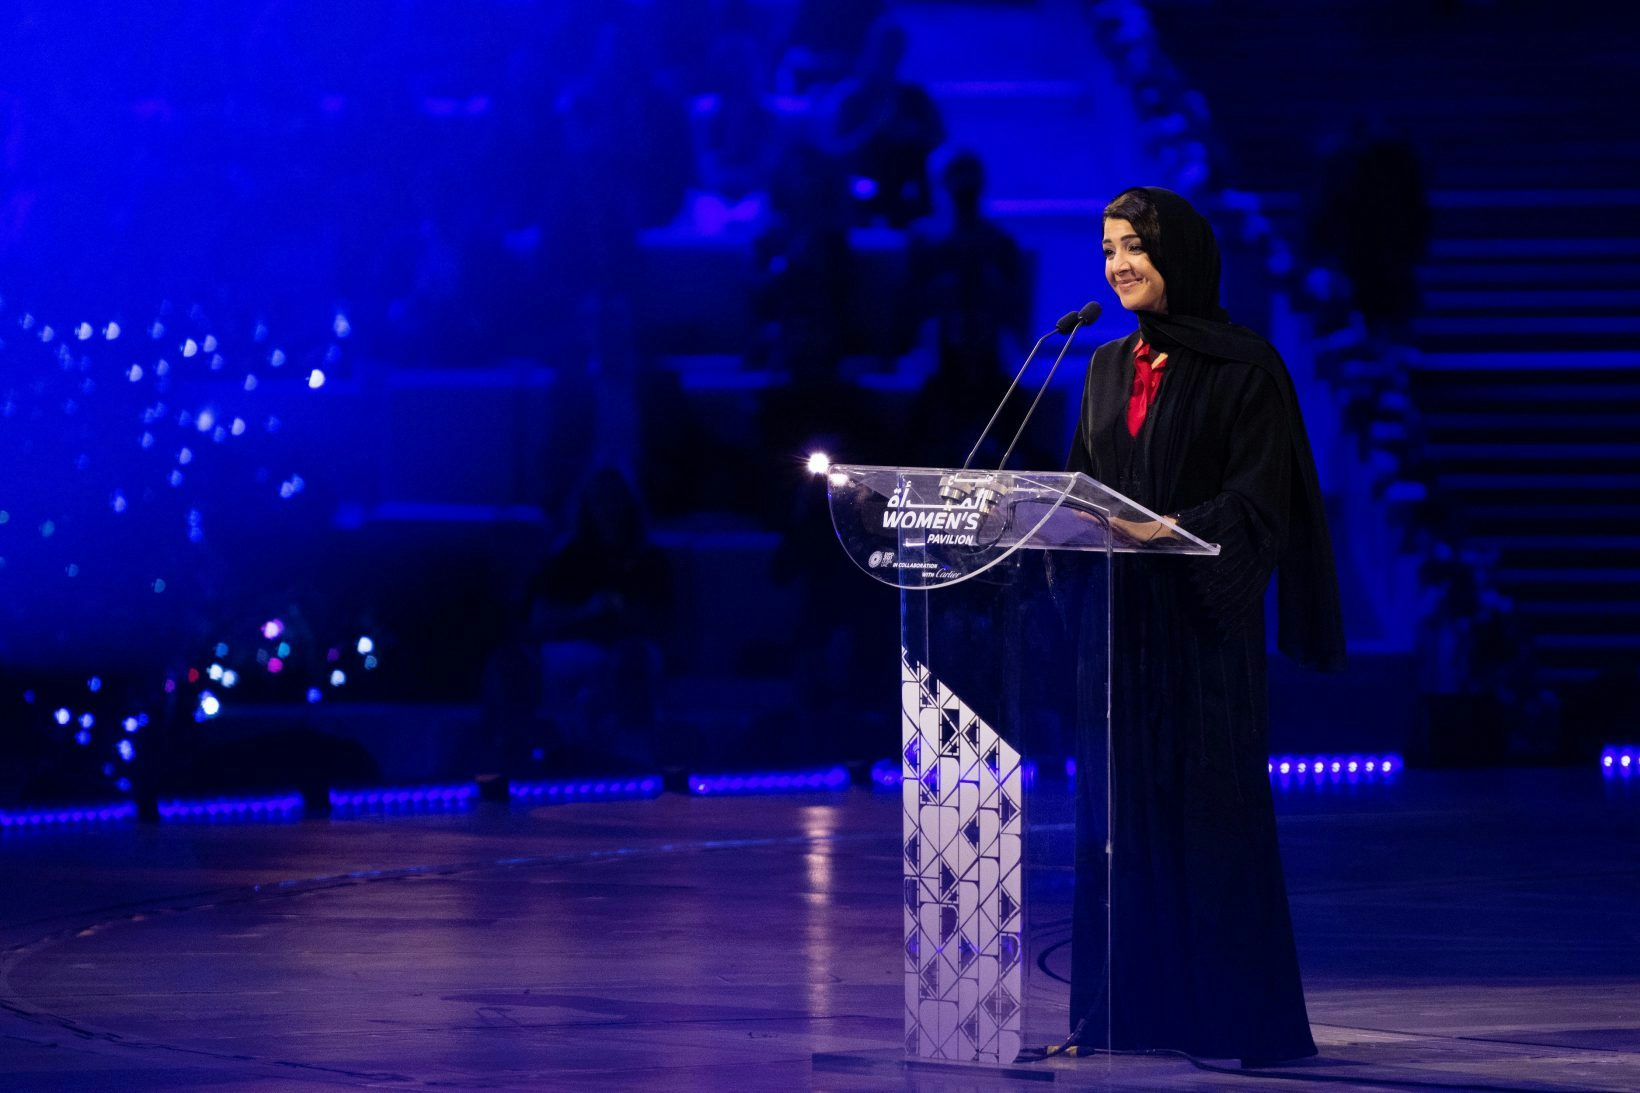 In Dubai, the Women’s Pavilion has succeeded in making women’s rights advocacy a must